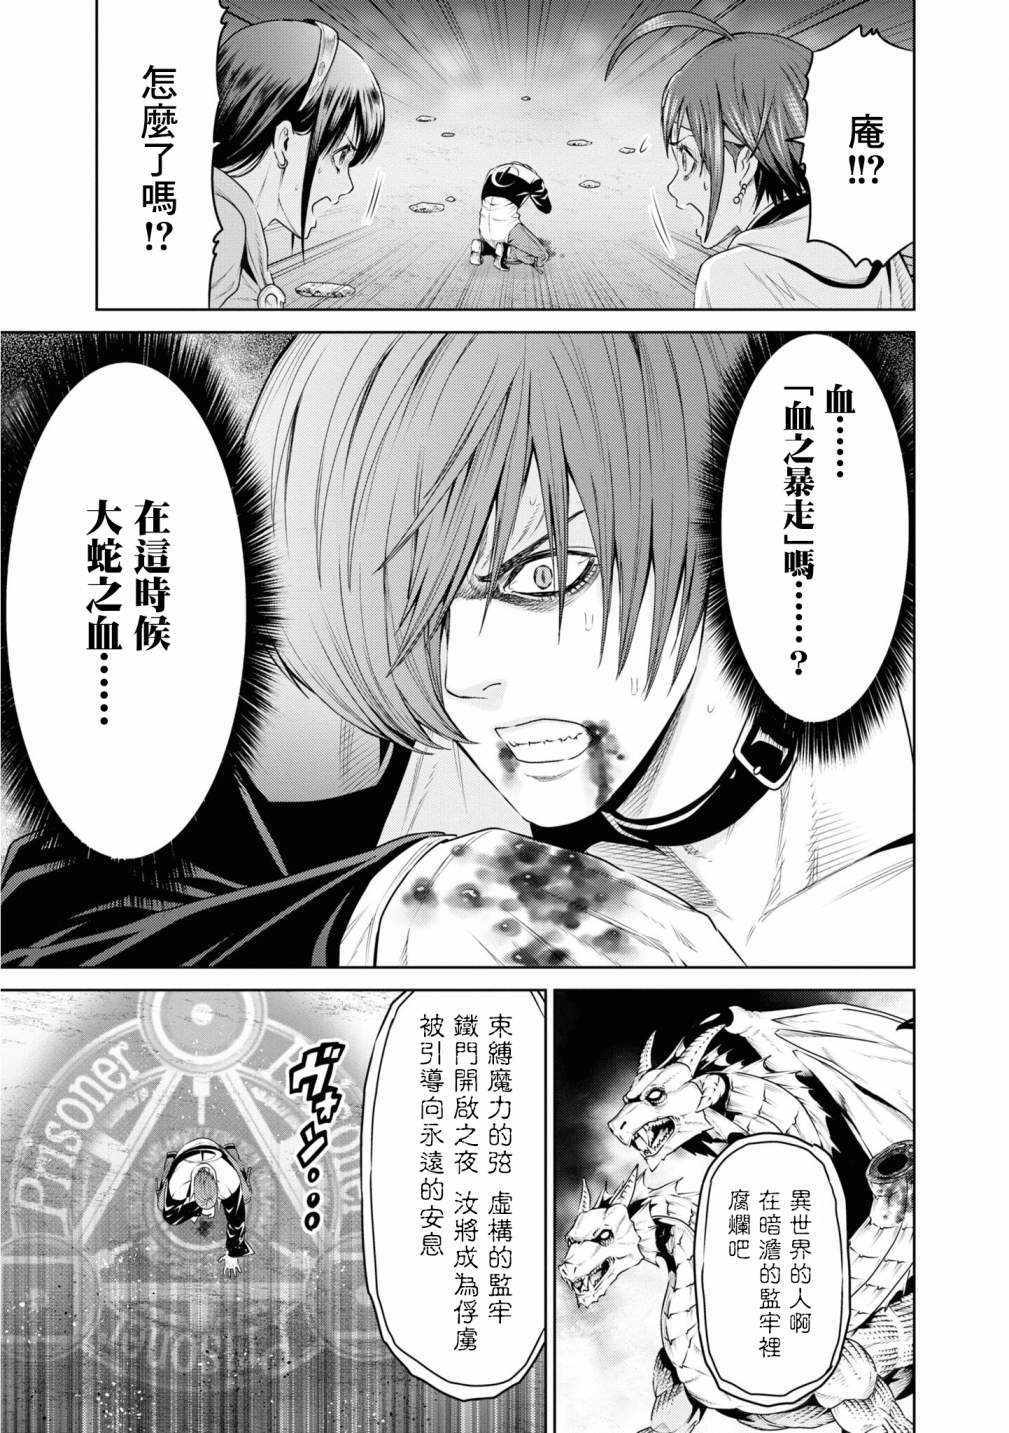 《THE KING OF FANTASY 八神庵的异世界无双》漫画 八神庵的异世界无双 013集